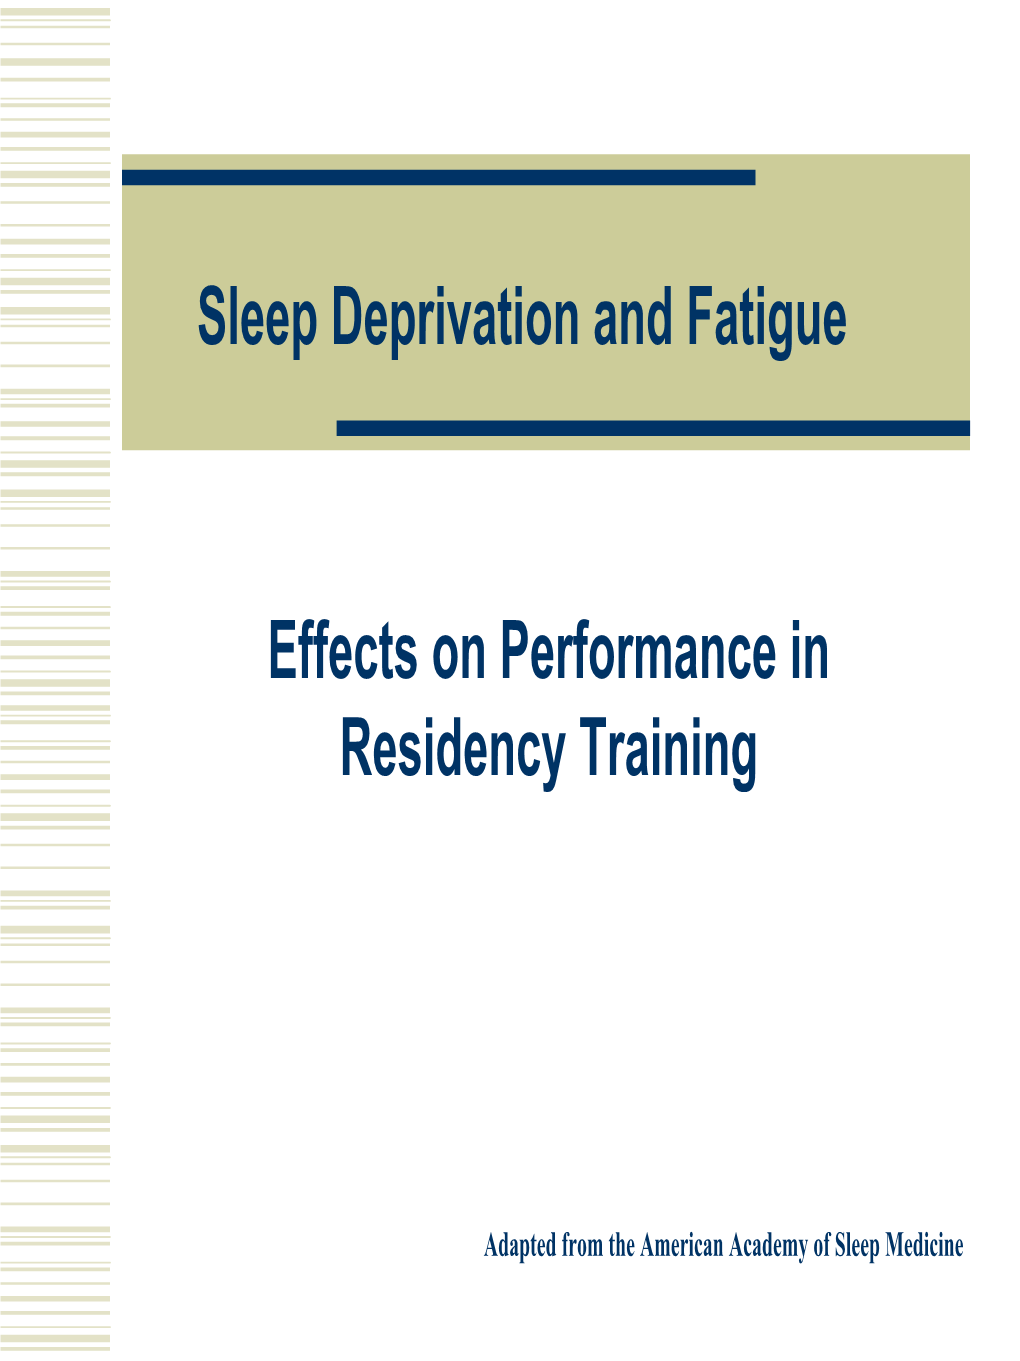 Sleep Deprivation and Fatigue: Effects on Performance in Residency